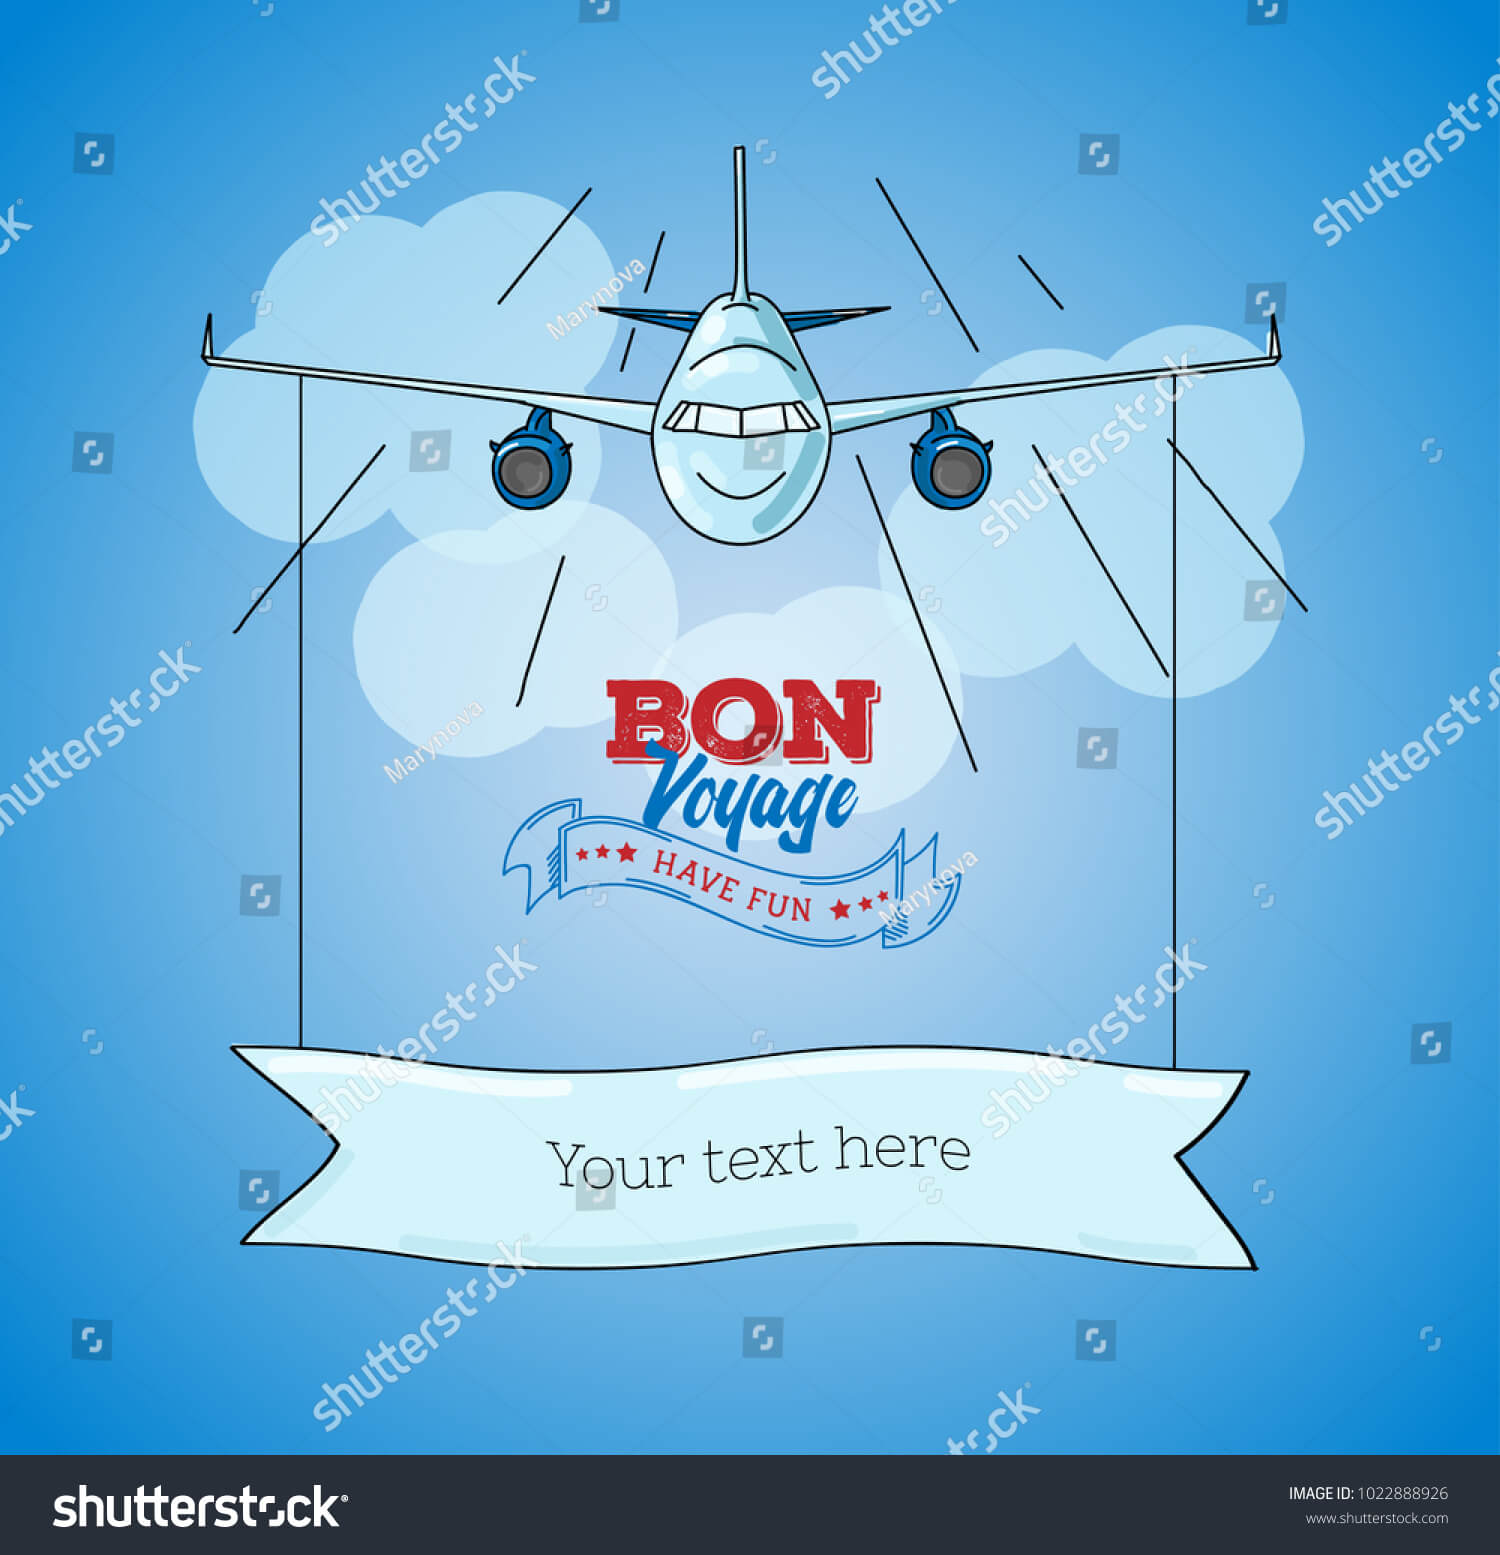 Card Template Plane Graphic Illustration On Stock Vector Inside Bon Voyage Card Template